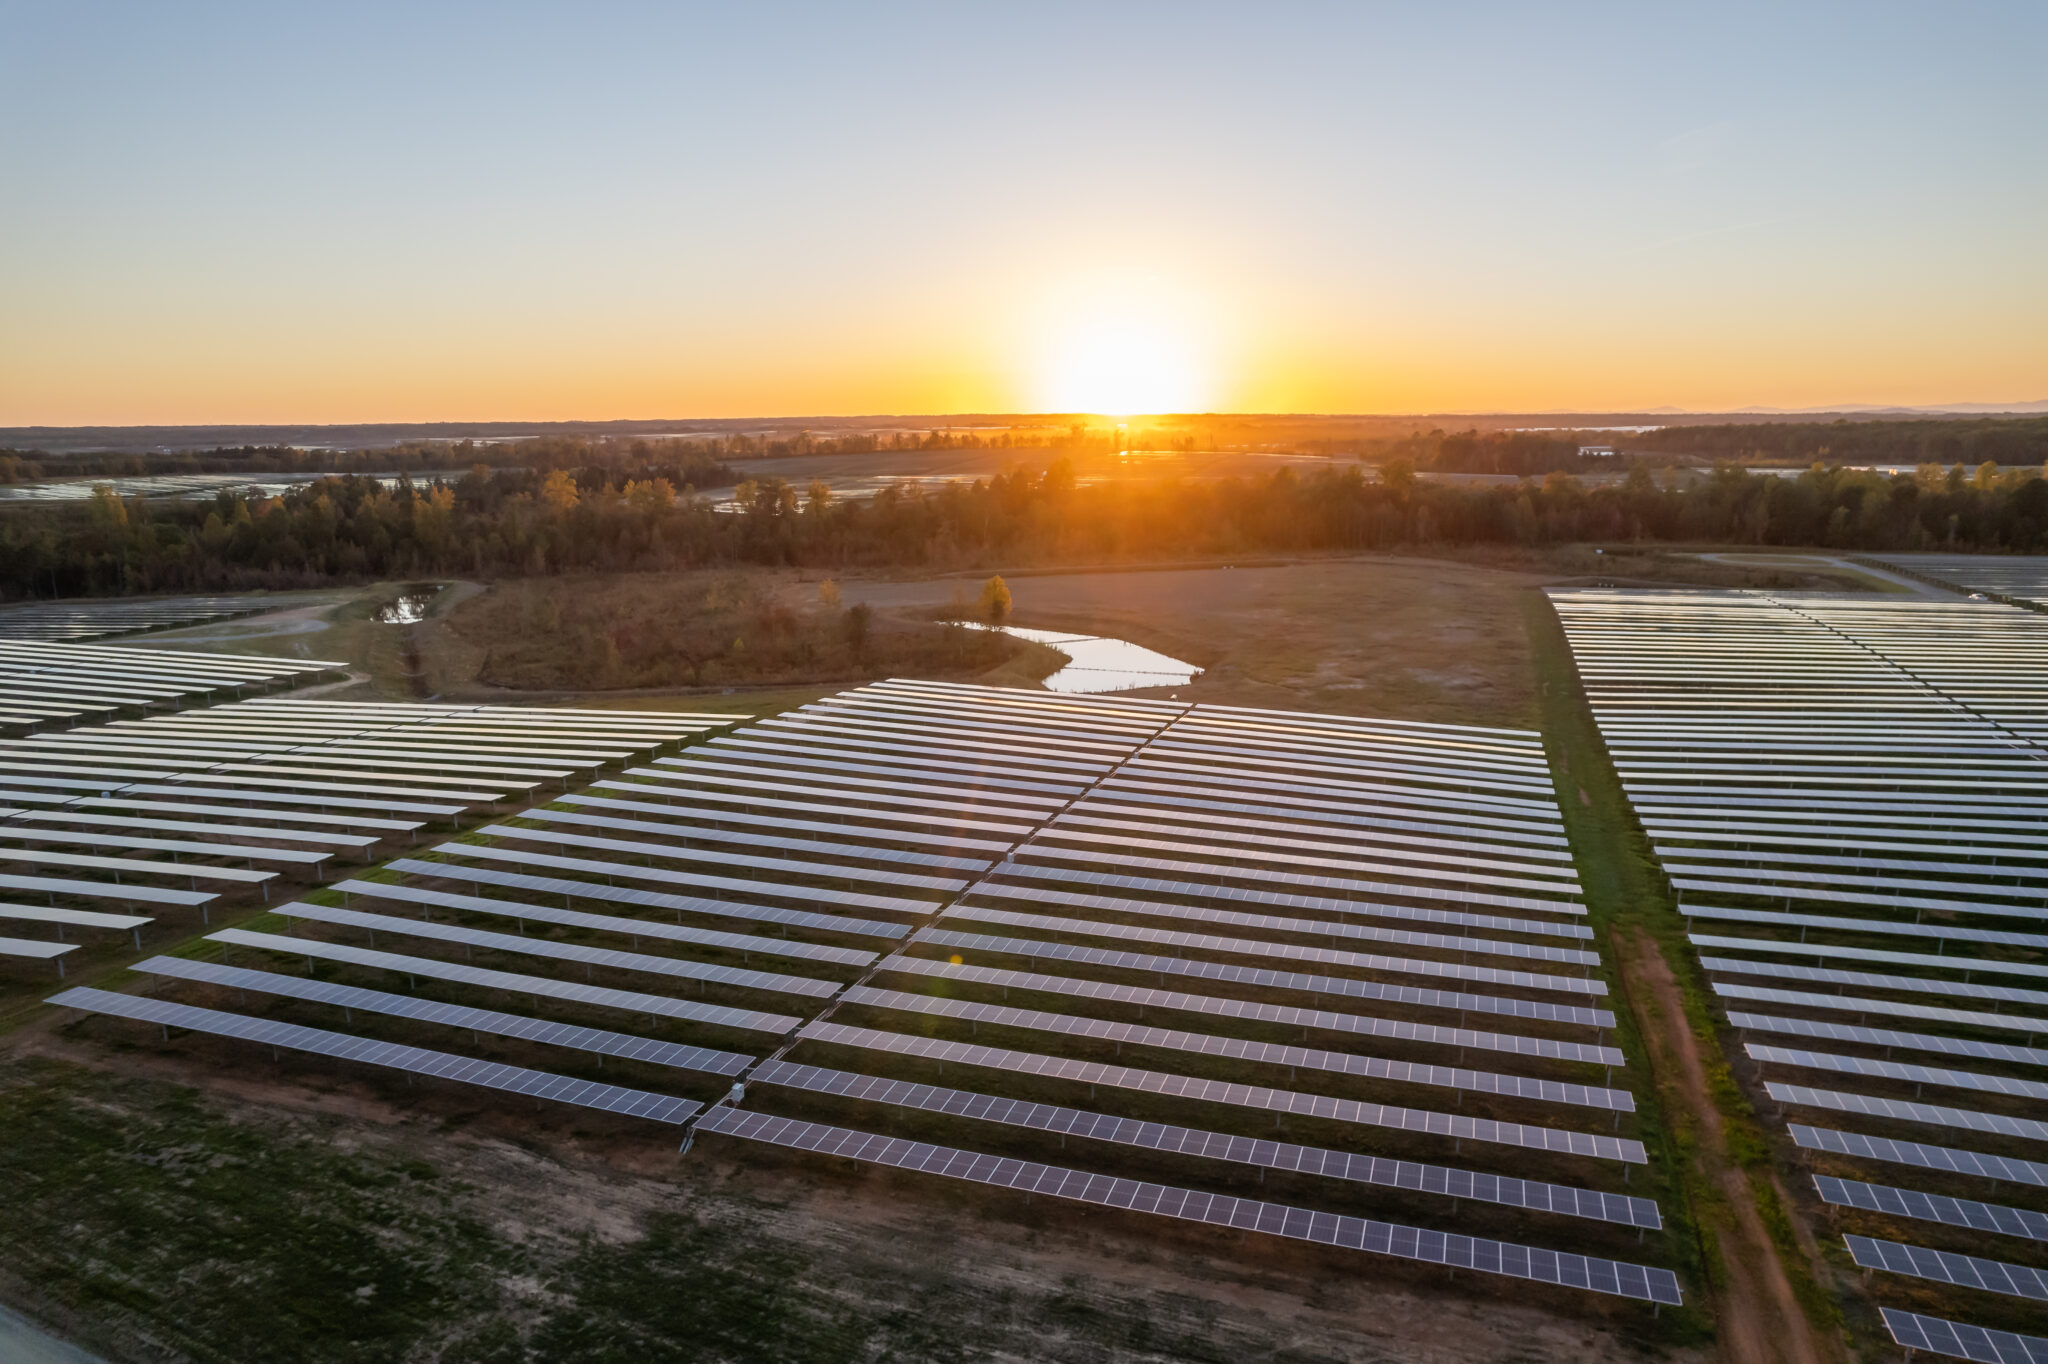 Renewable project developer AES has massive solar farms, like the one seen here in Spotsylvania County, Virginia, to help meet the virtually insatiable clean power demands of tech giants like Microsoft – which are being turbocharged by AI. Photo credit: AES.